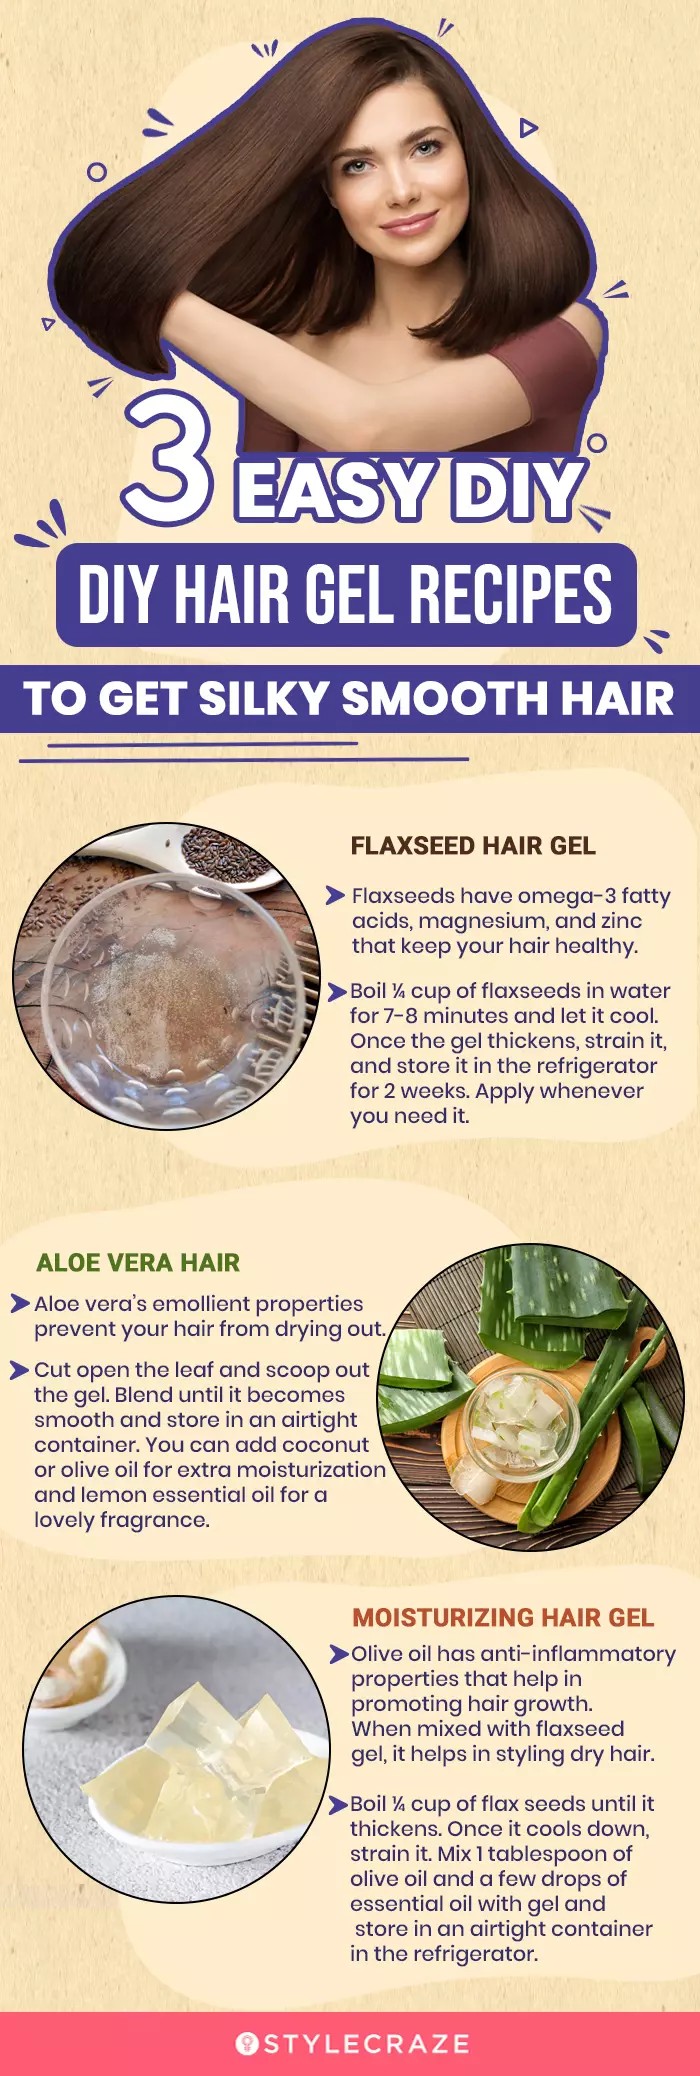 3 easy diy hair gel recipes to get silky smooth hair (infographic)